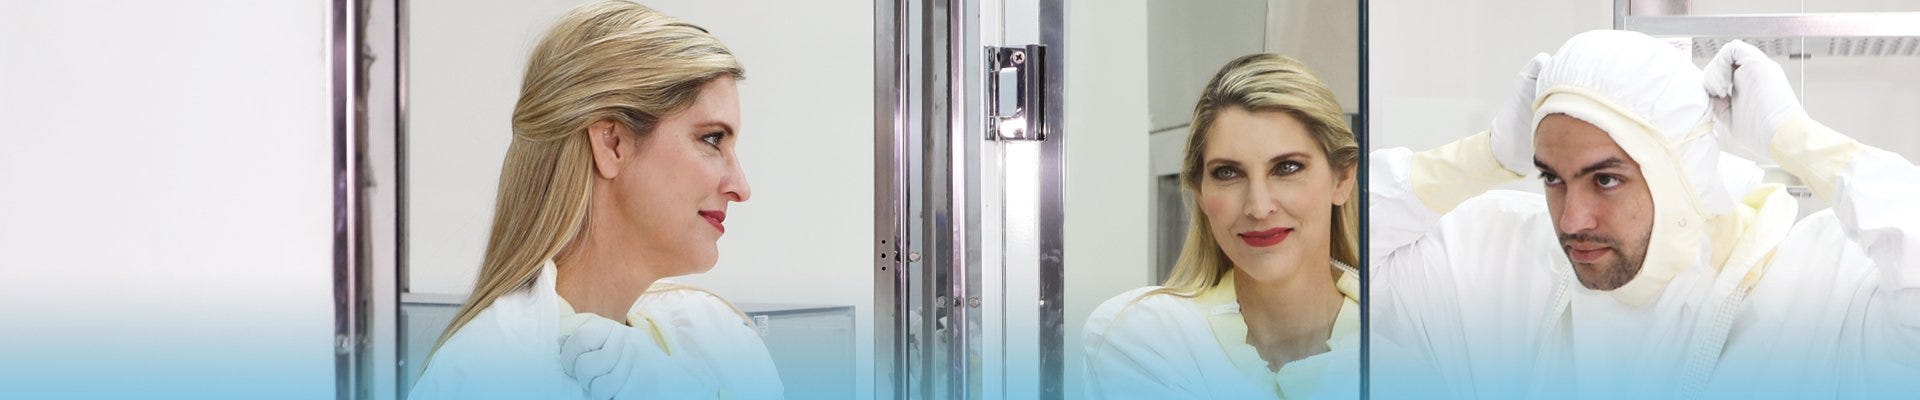 Cleanroom mirrors are space saving, great for meeting gowning protocol